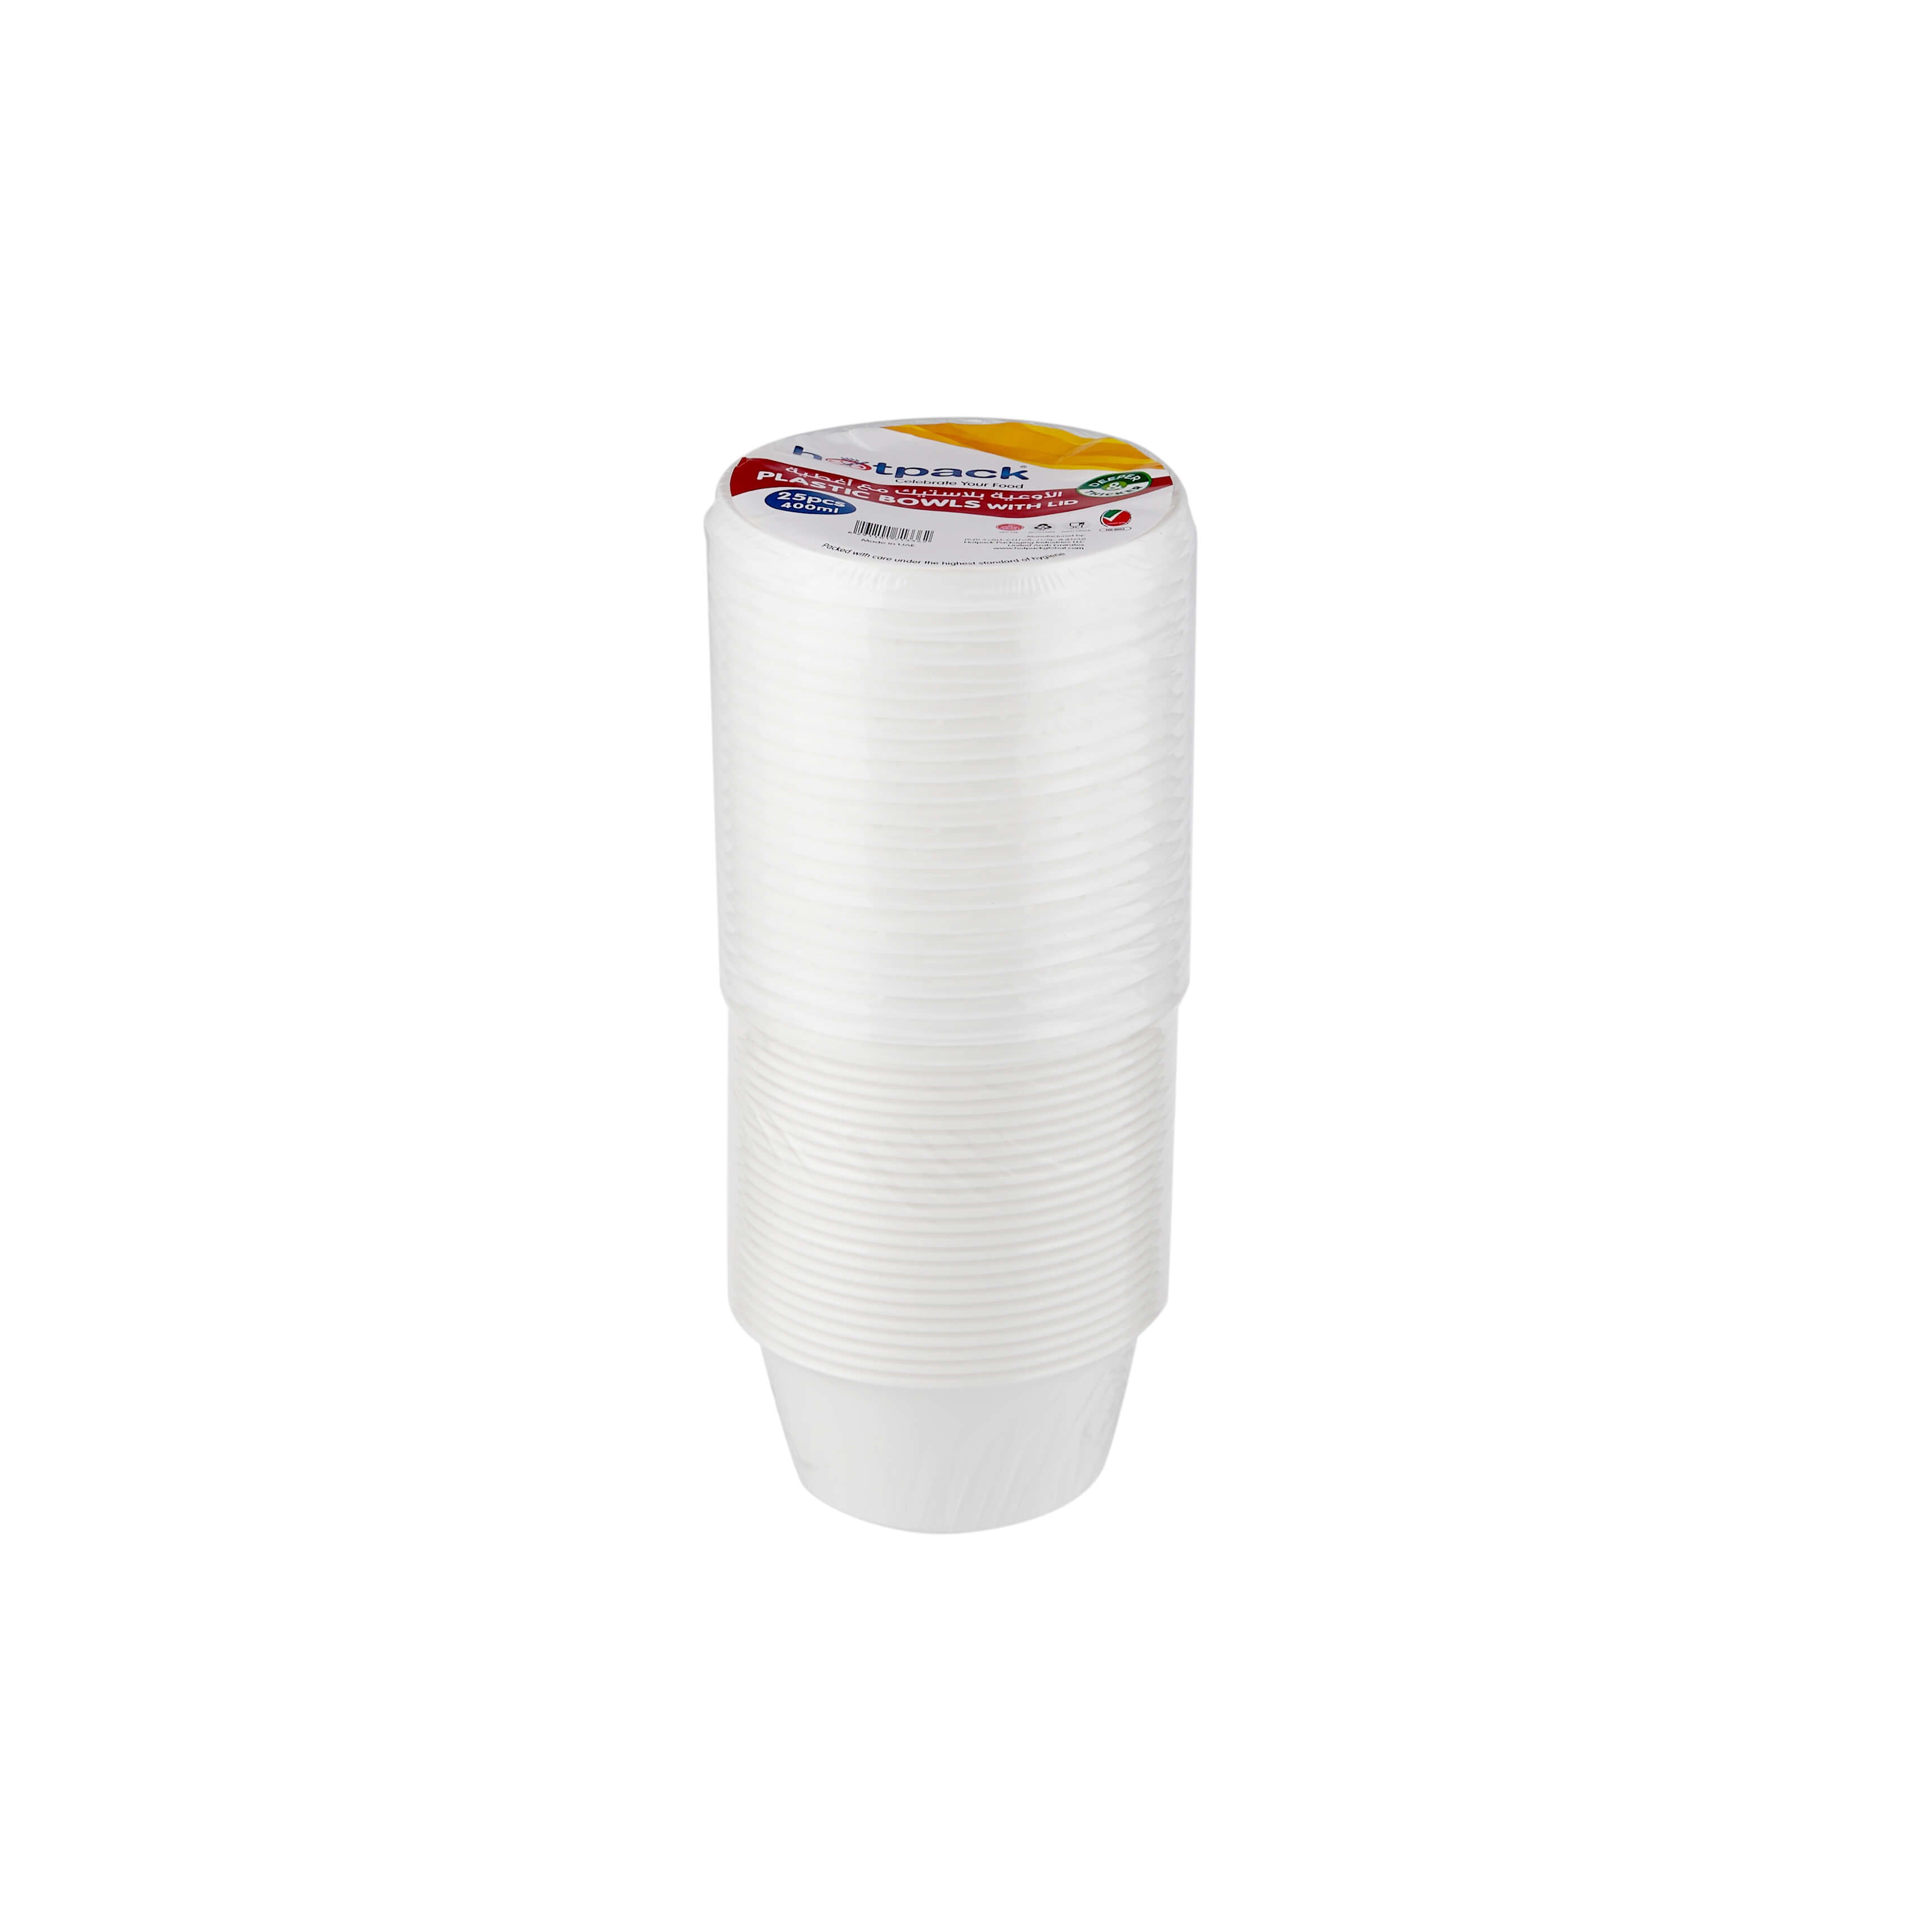 Plastic White Bowl 400ml With Lid 25 Pieces - hotpackwebstore.com